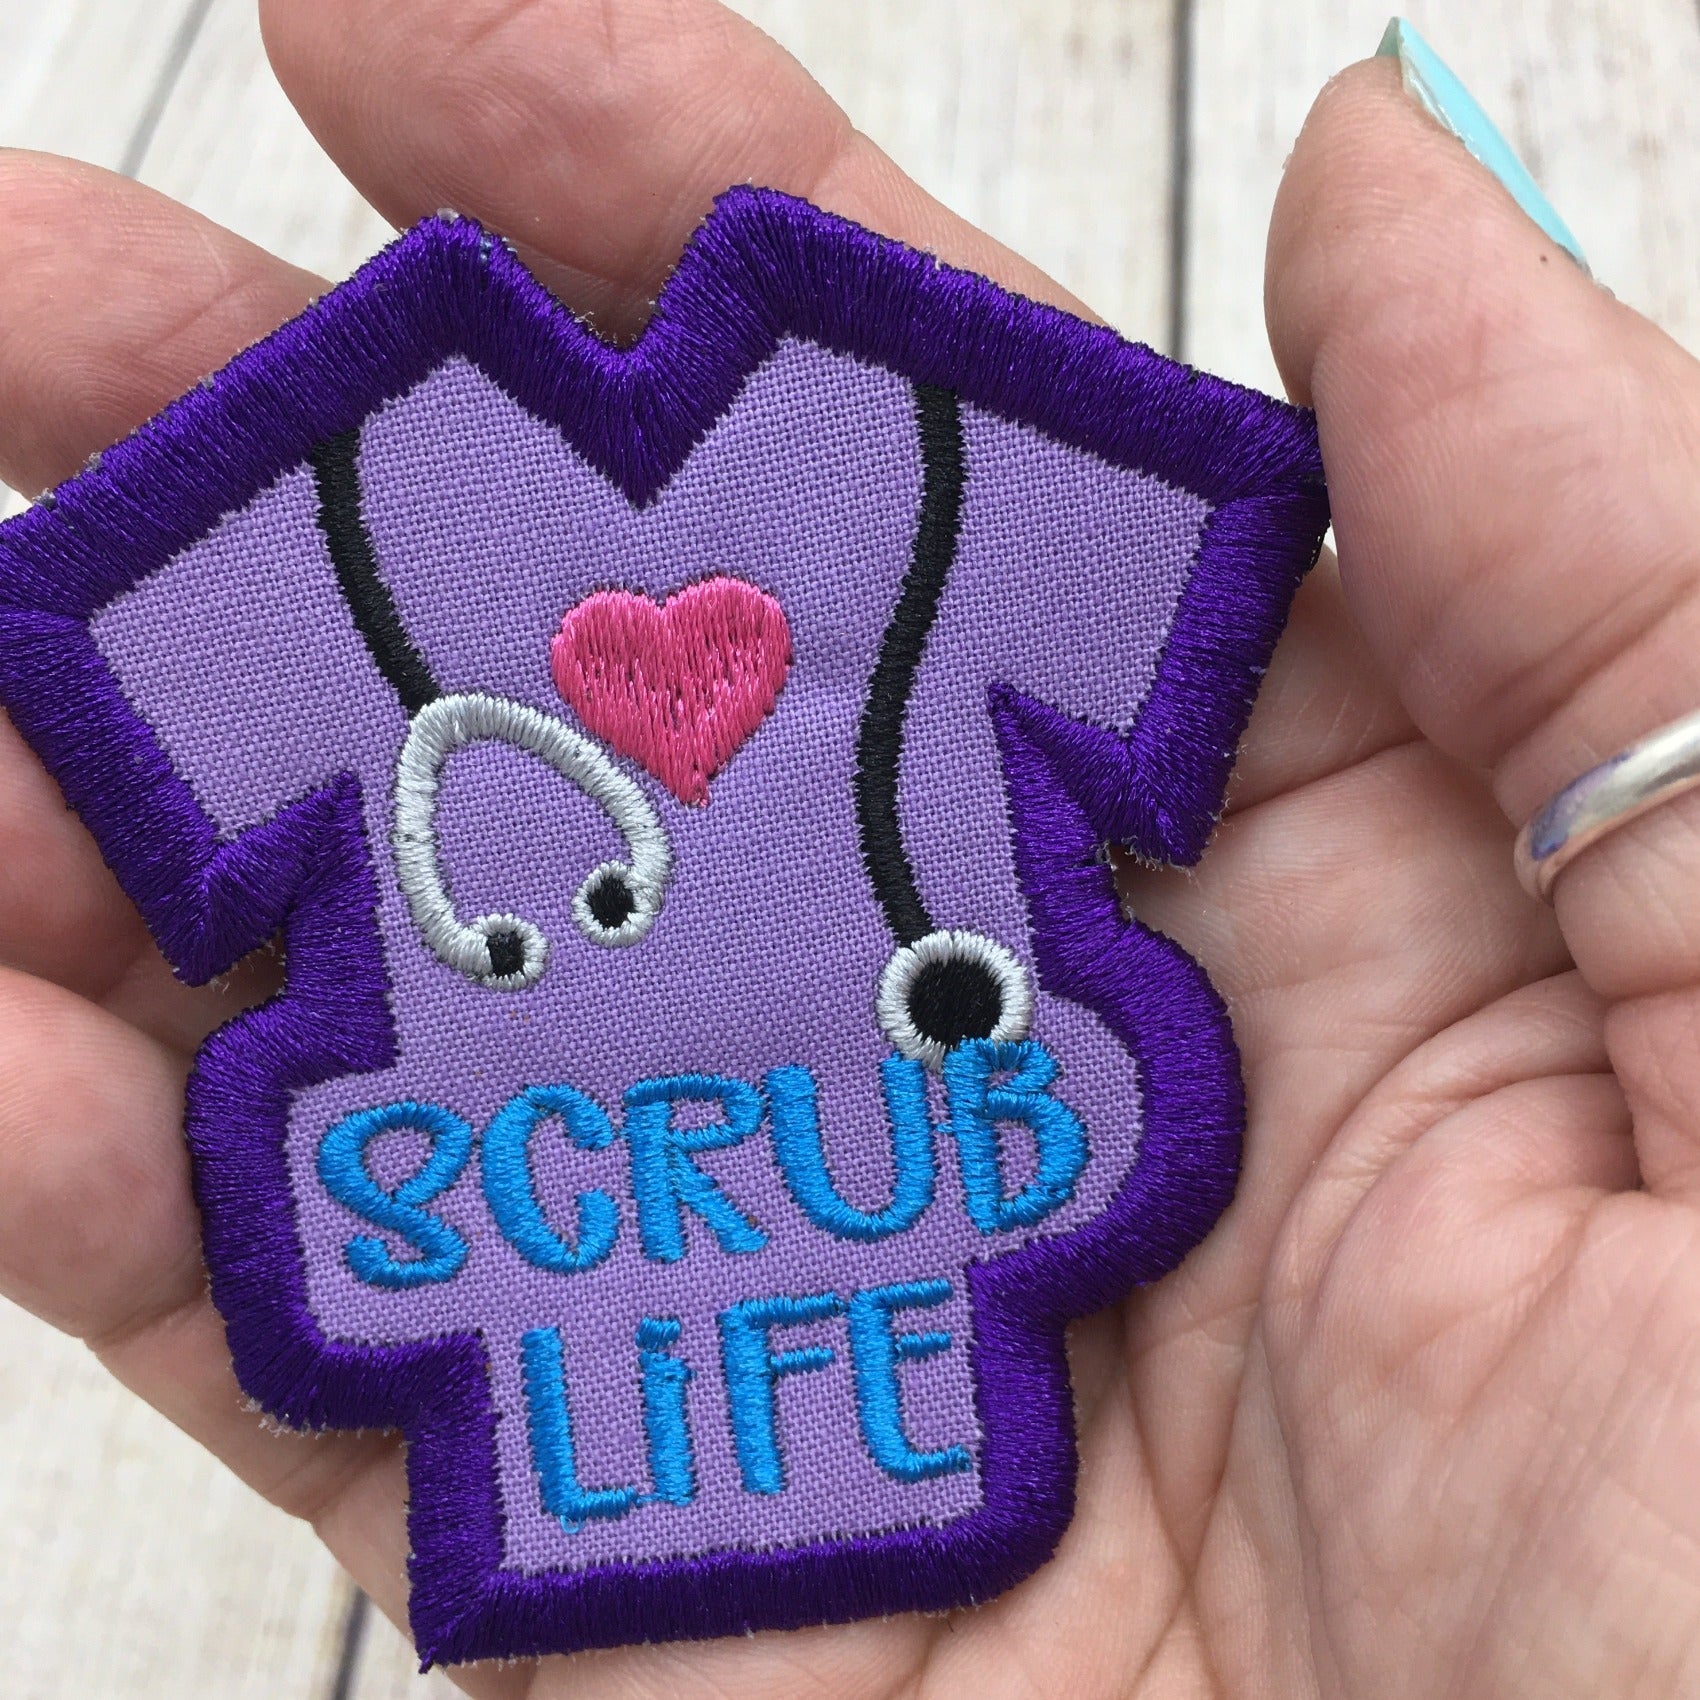 Scrub life embroidered patch for medical staff